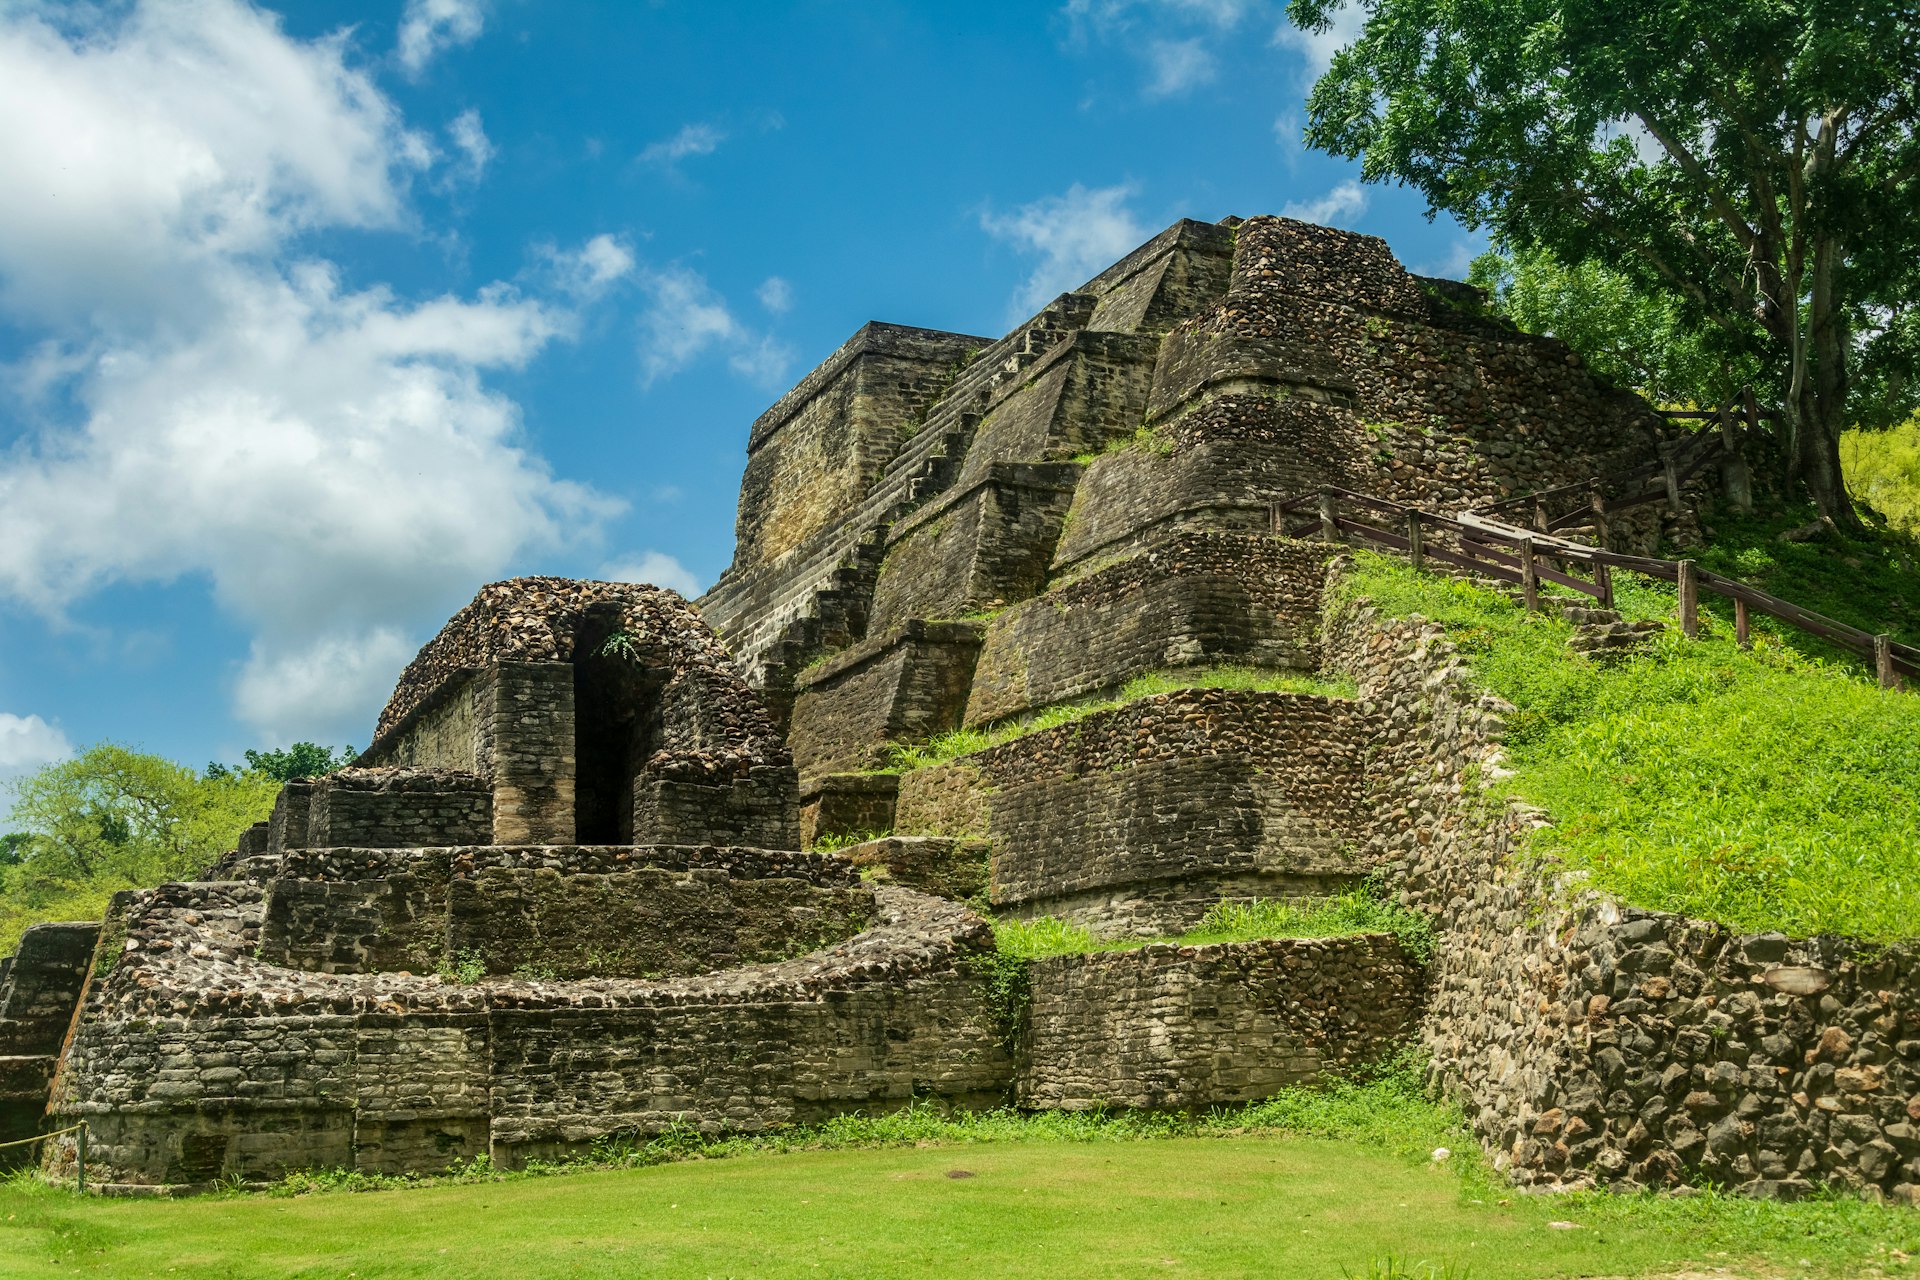 The stones of ancient Maya ruins stack to form a pyramid shape in Belize